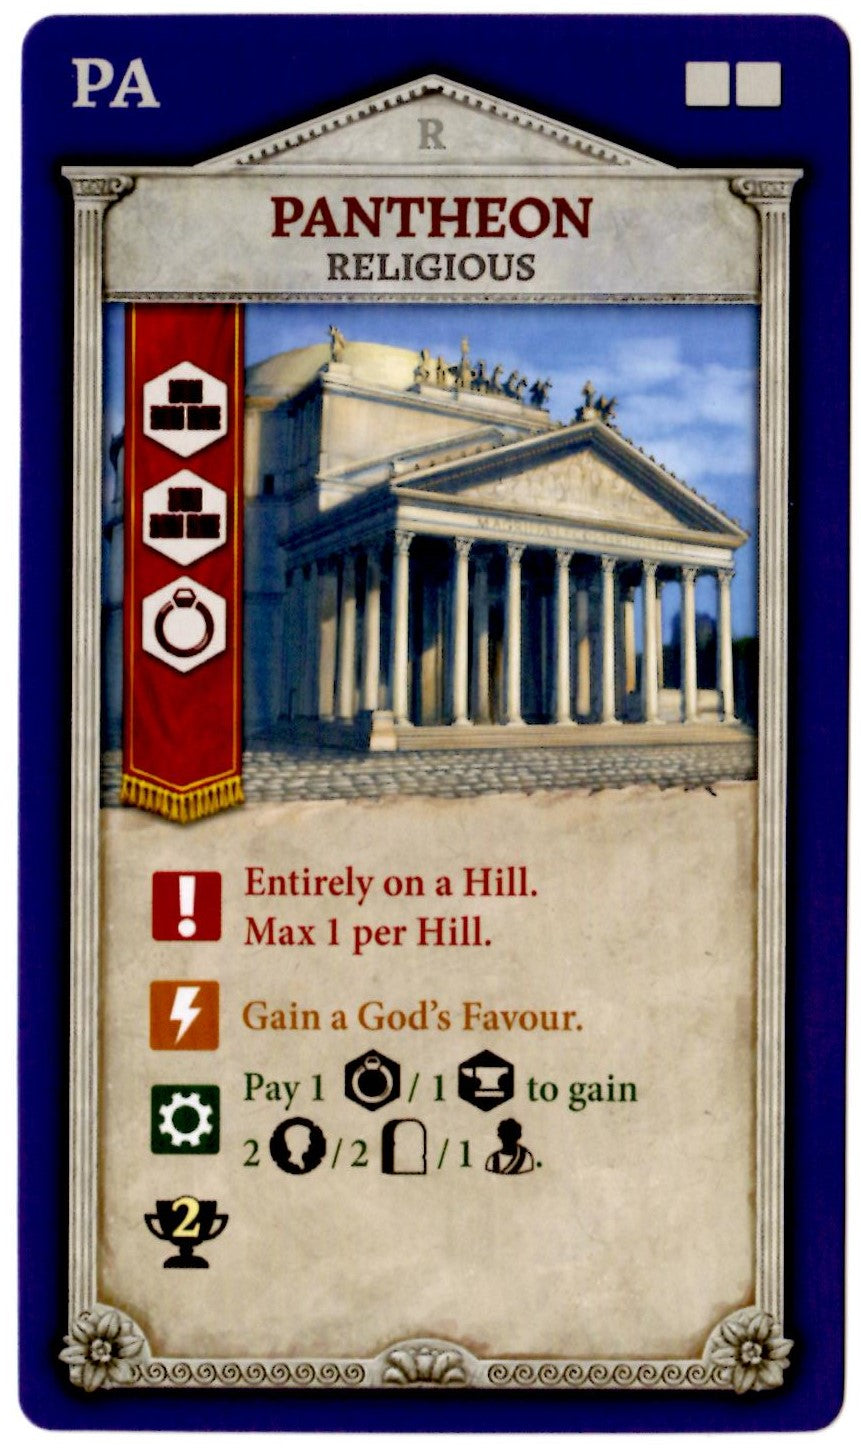 Rome & Roll: Pantheon Promo Card for use with the board game R, Rome & Roll, Spring Sale, sold at the BoardGameGeek Store